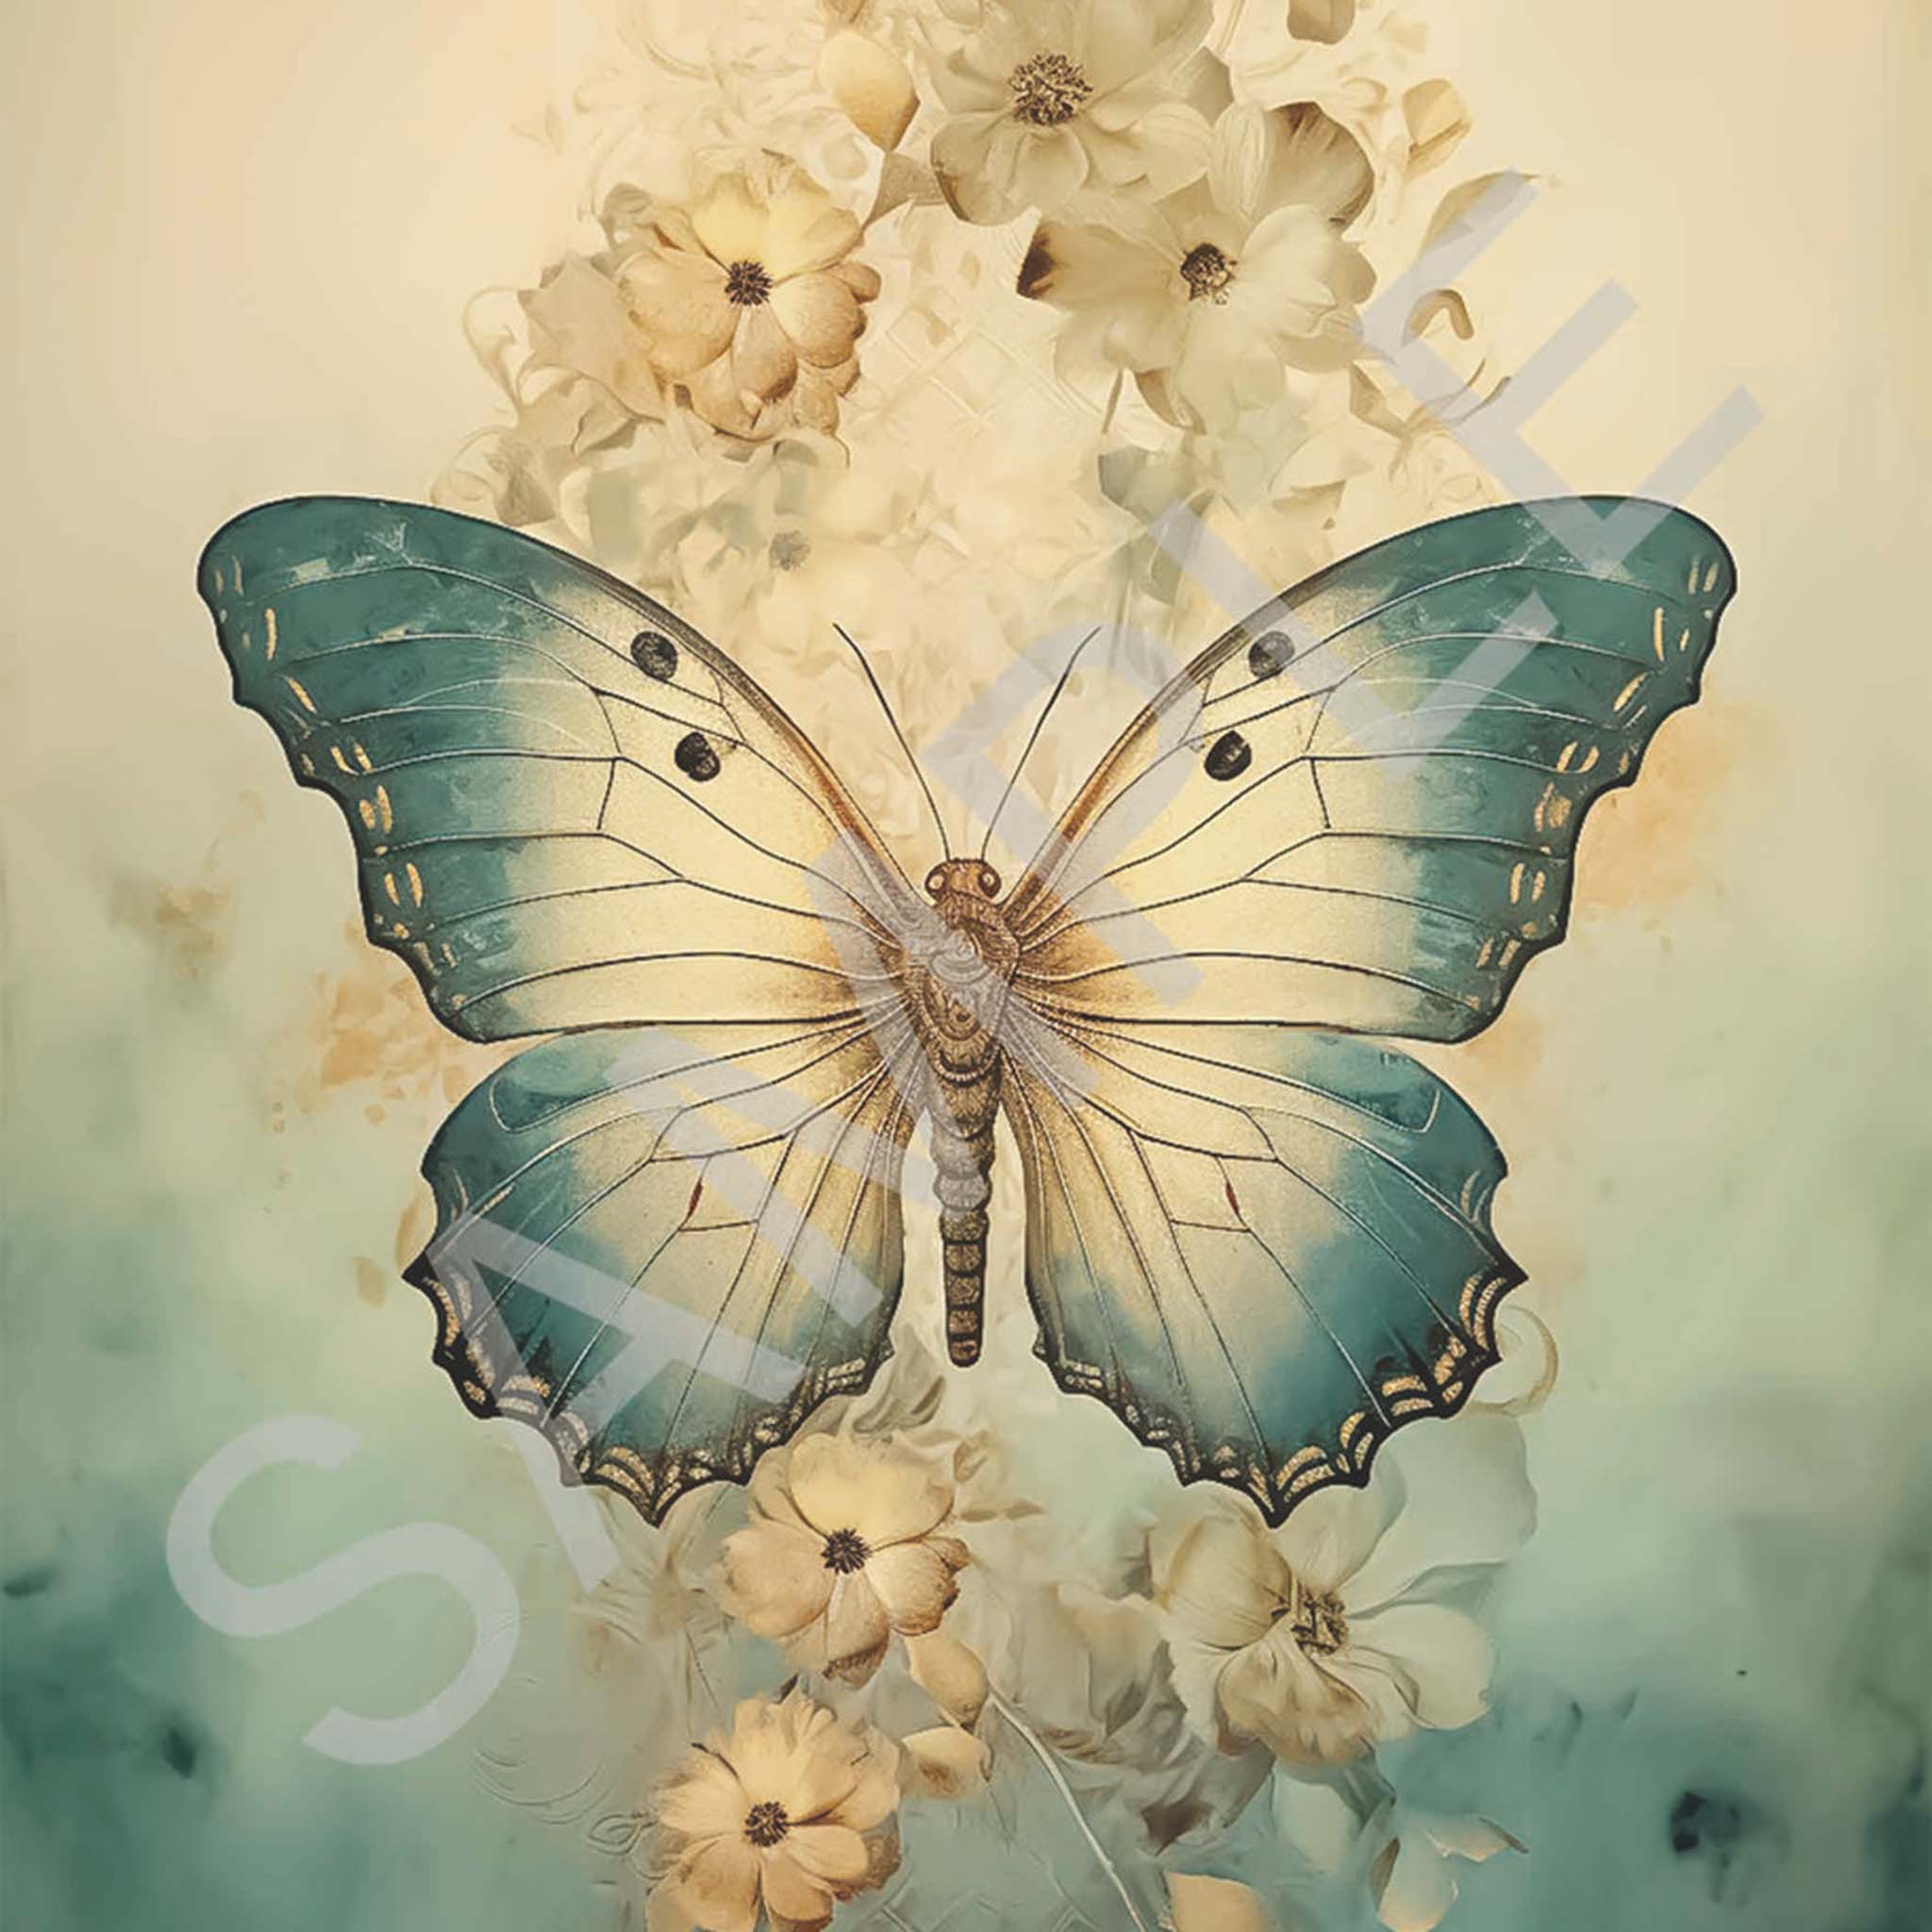 Close-up of an A4 rice paper design that features a large blue and cream butterfly, set against a dreamy background adorned with a garland of soft yellow flowers.